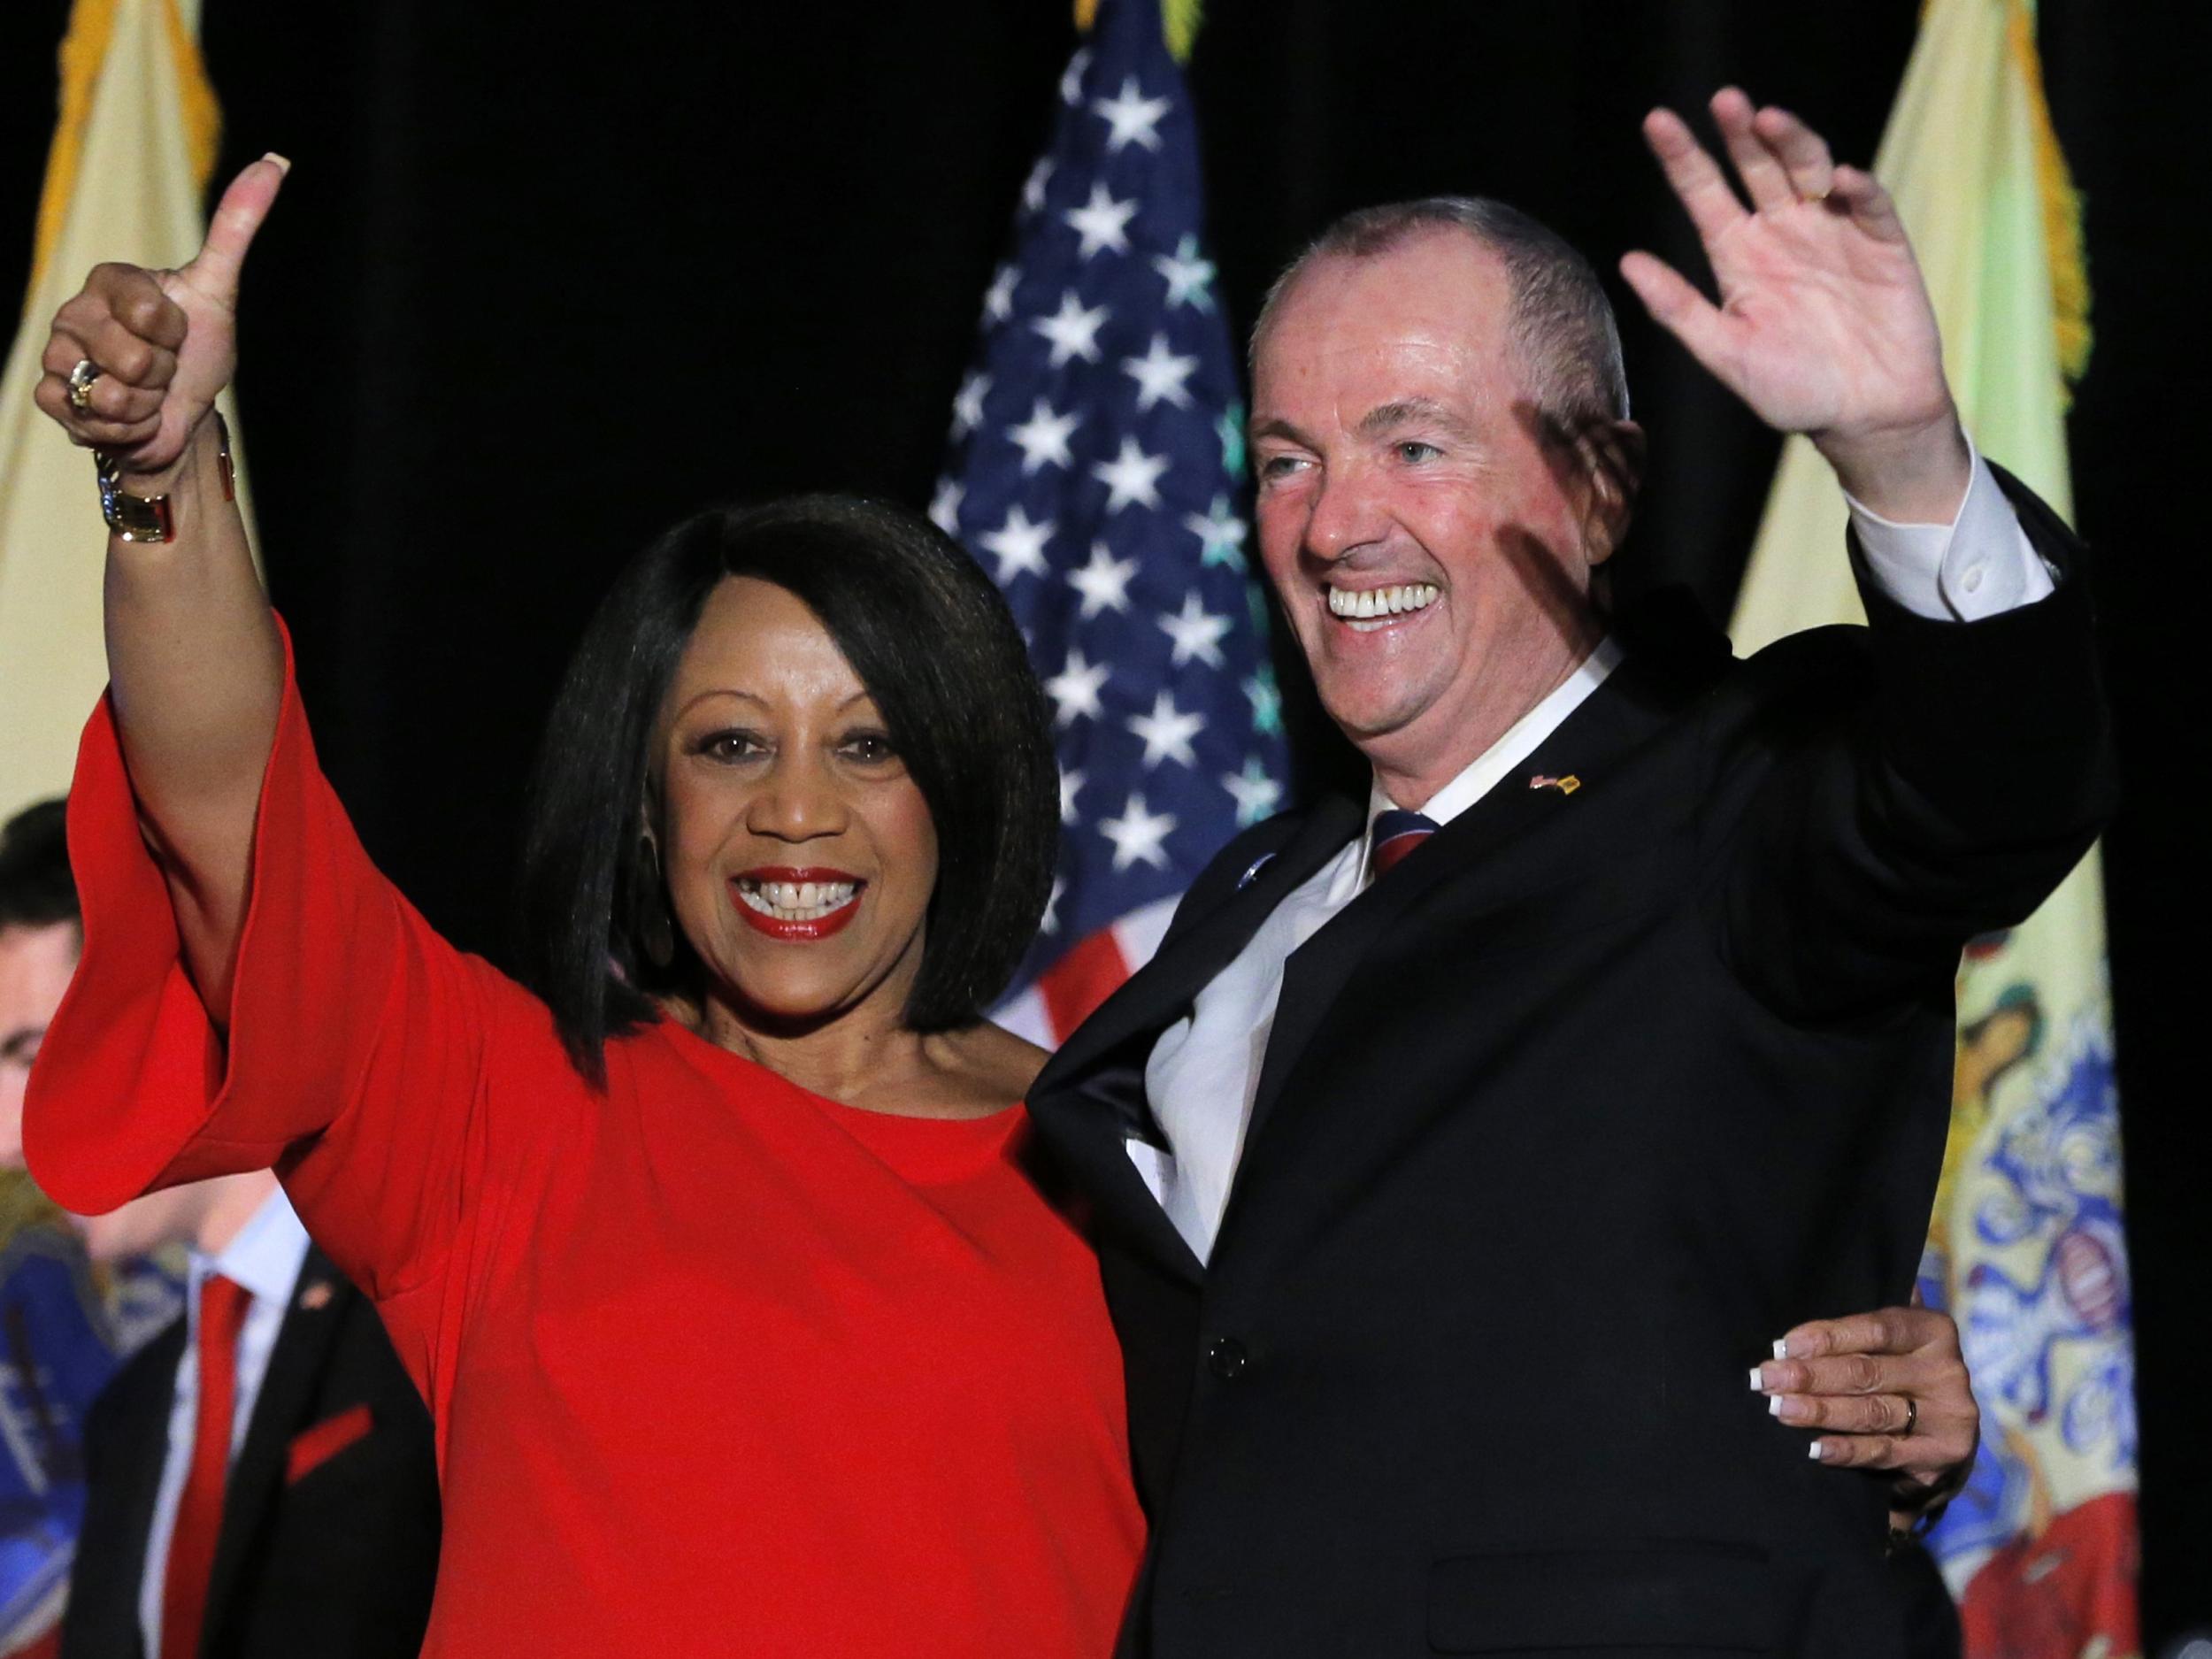 Democratic candidate Phil Murphy celebrates with his running mate, Lieutenant Governor-elect Sheila Oliver, after he was elected Governor of New Jersey in Asbury Park